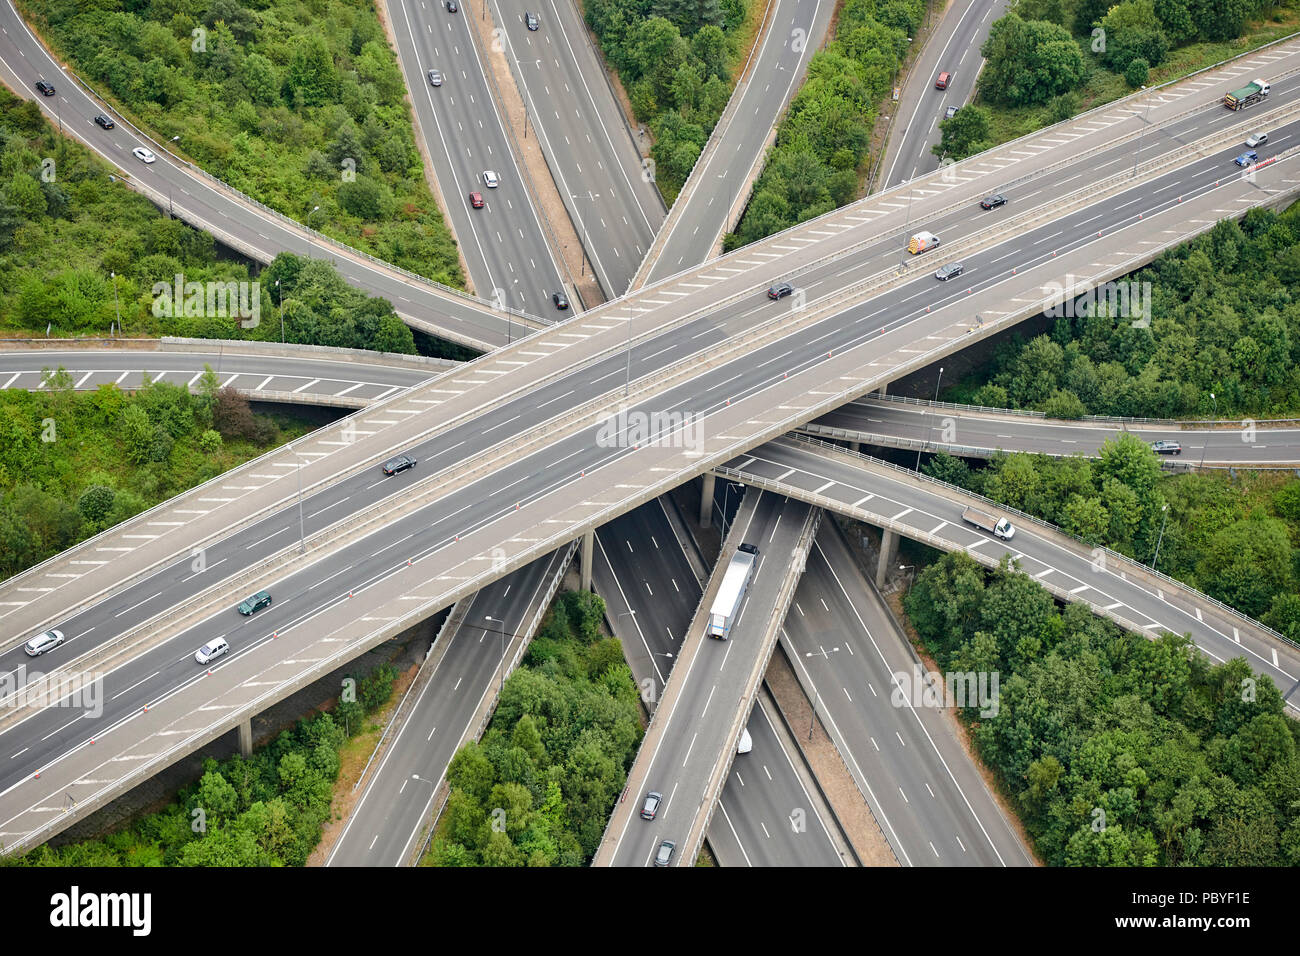 An aerial overhead view of the M23/M25  motorway Junction, South East England, UK Stock Photo